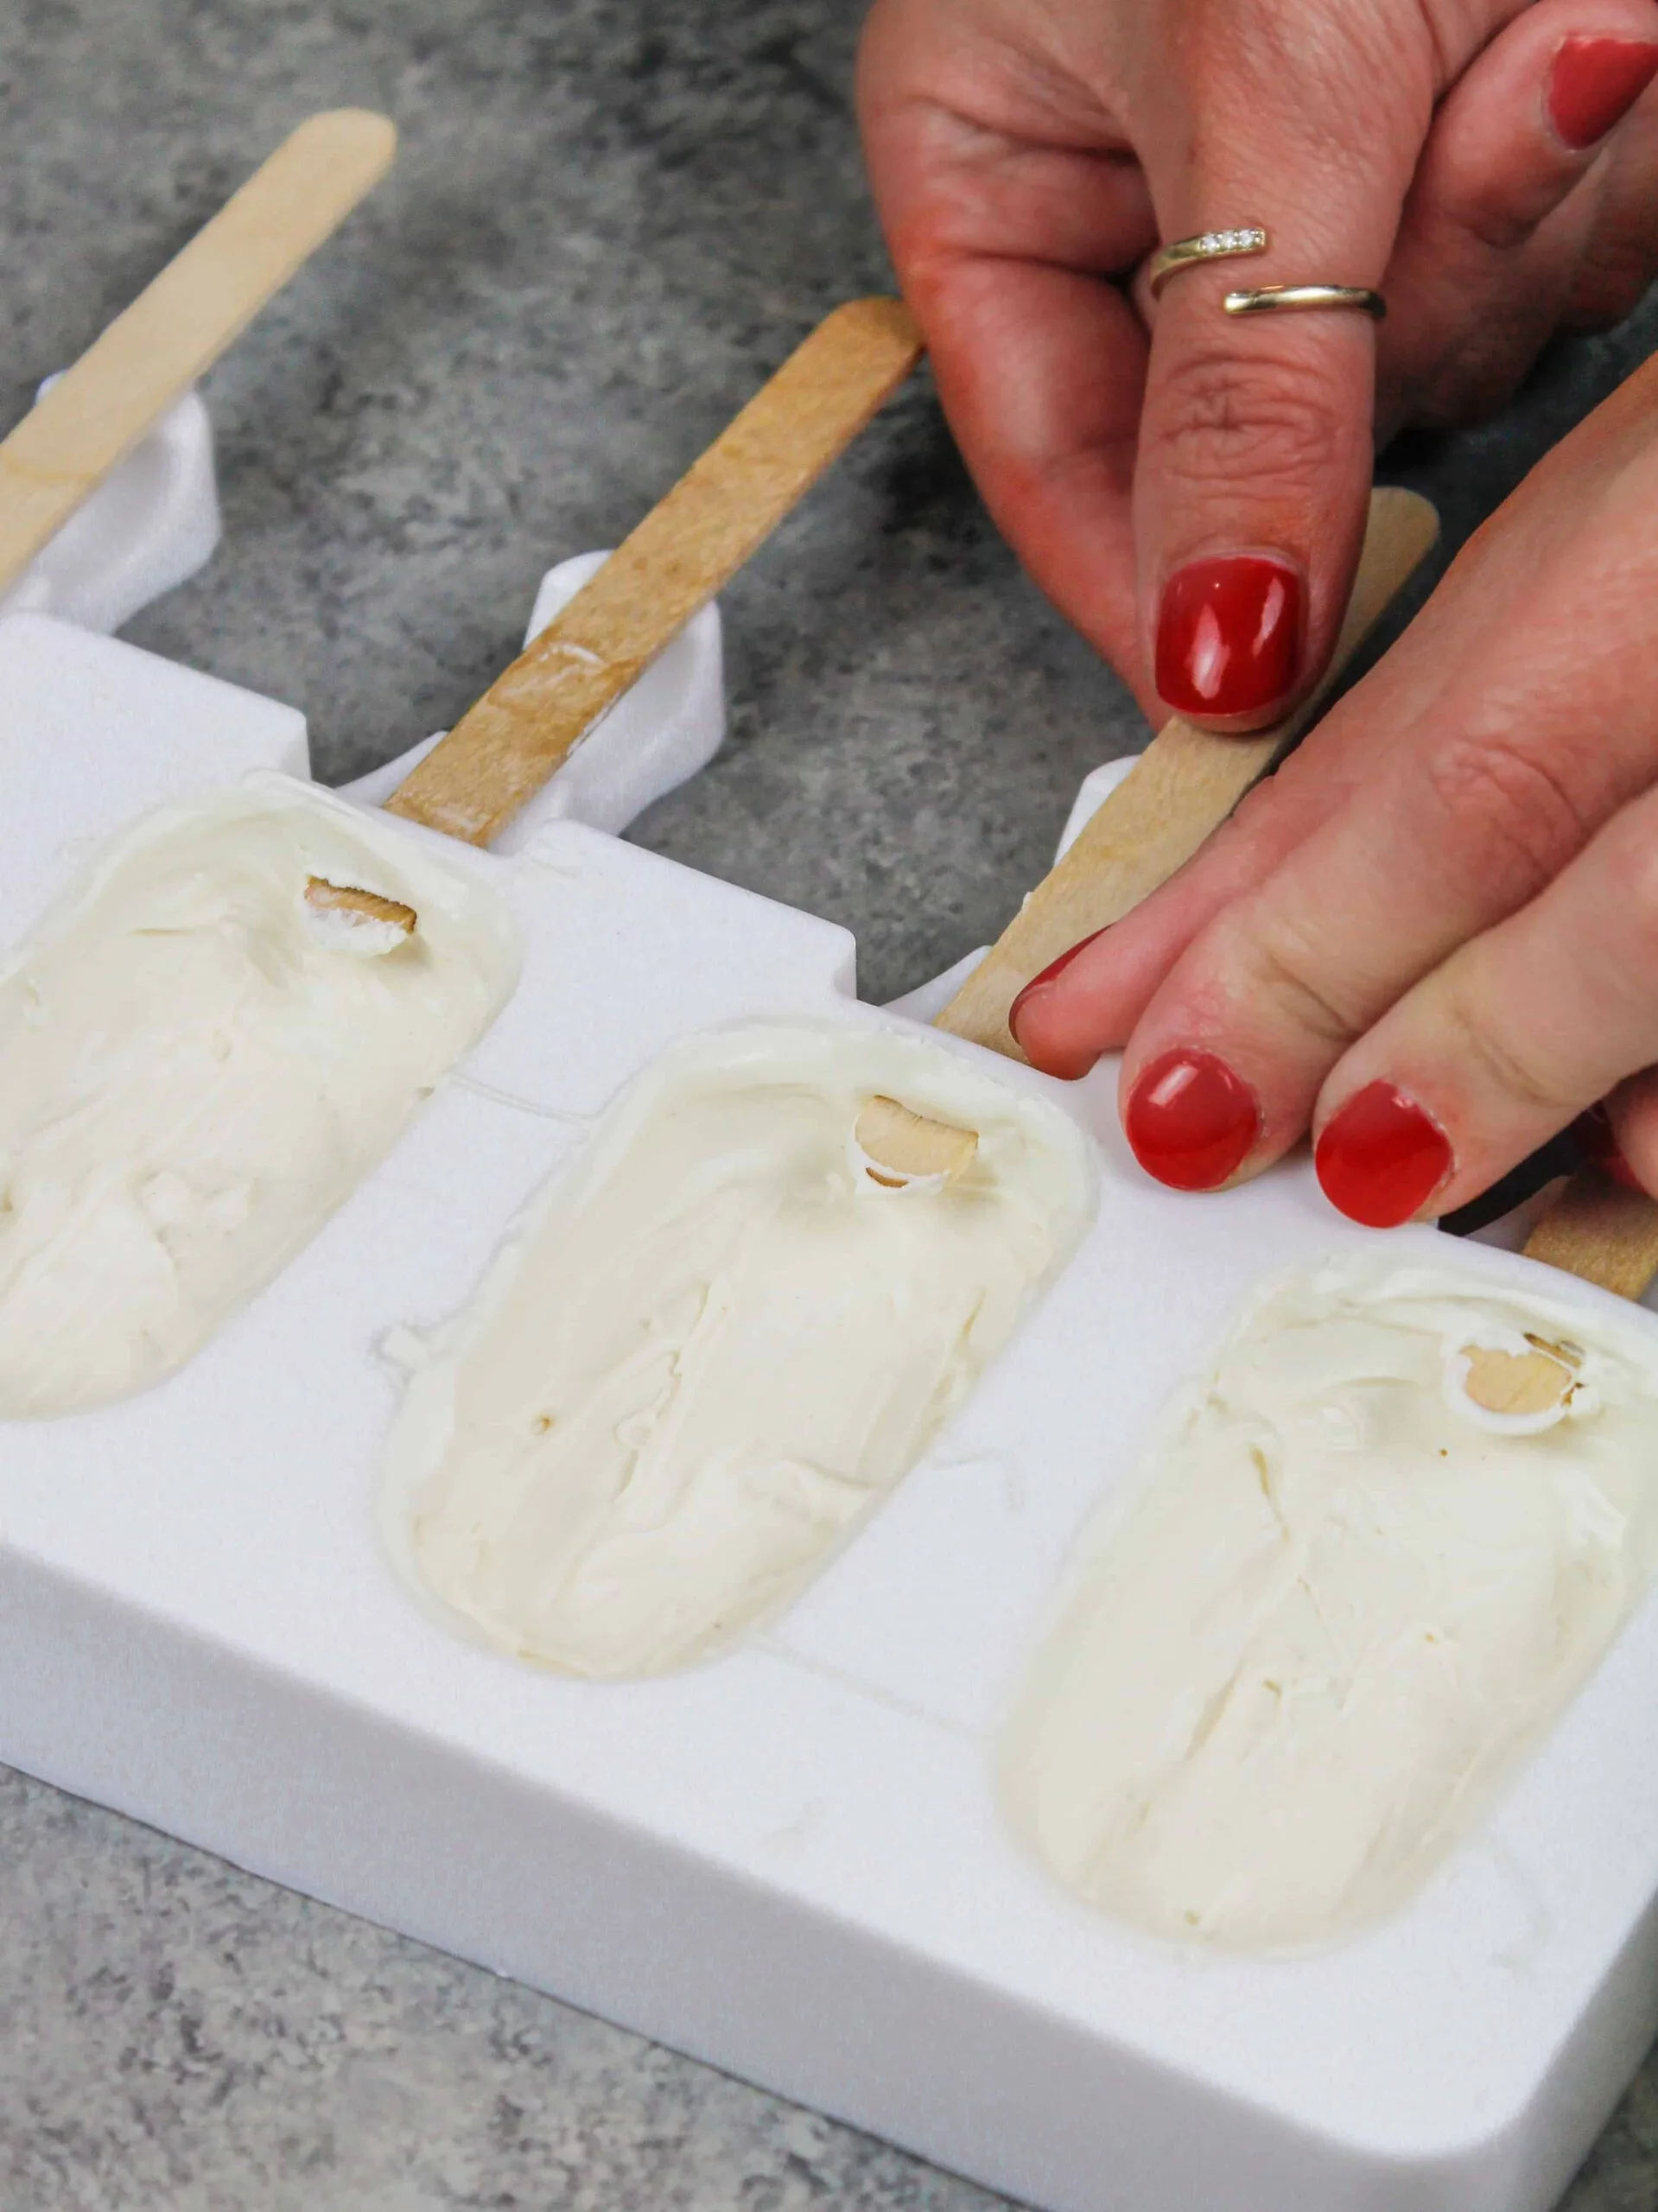 image of white chocolate and candy melts being painted into a silicone mold to make cakesicles, while inserting a popsicle stick to keep the opening in the mold open for later